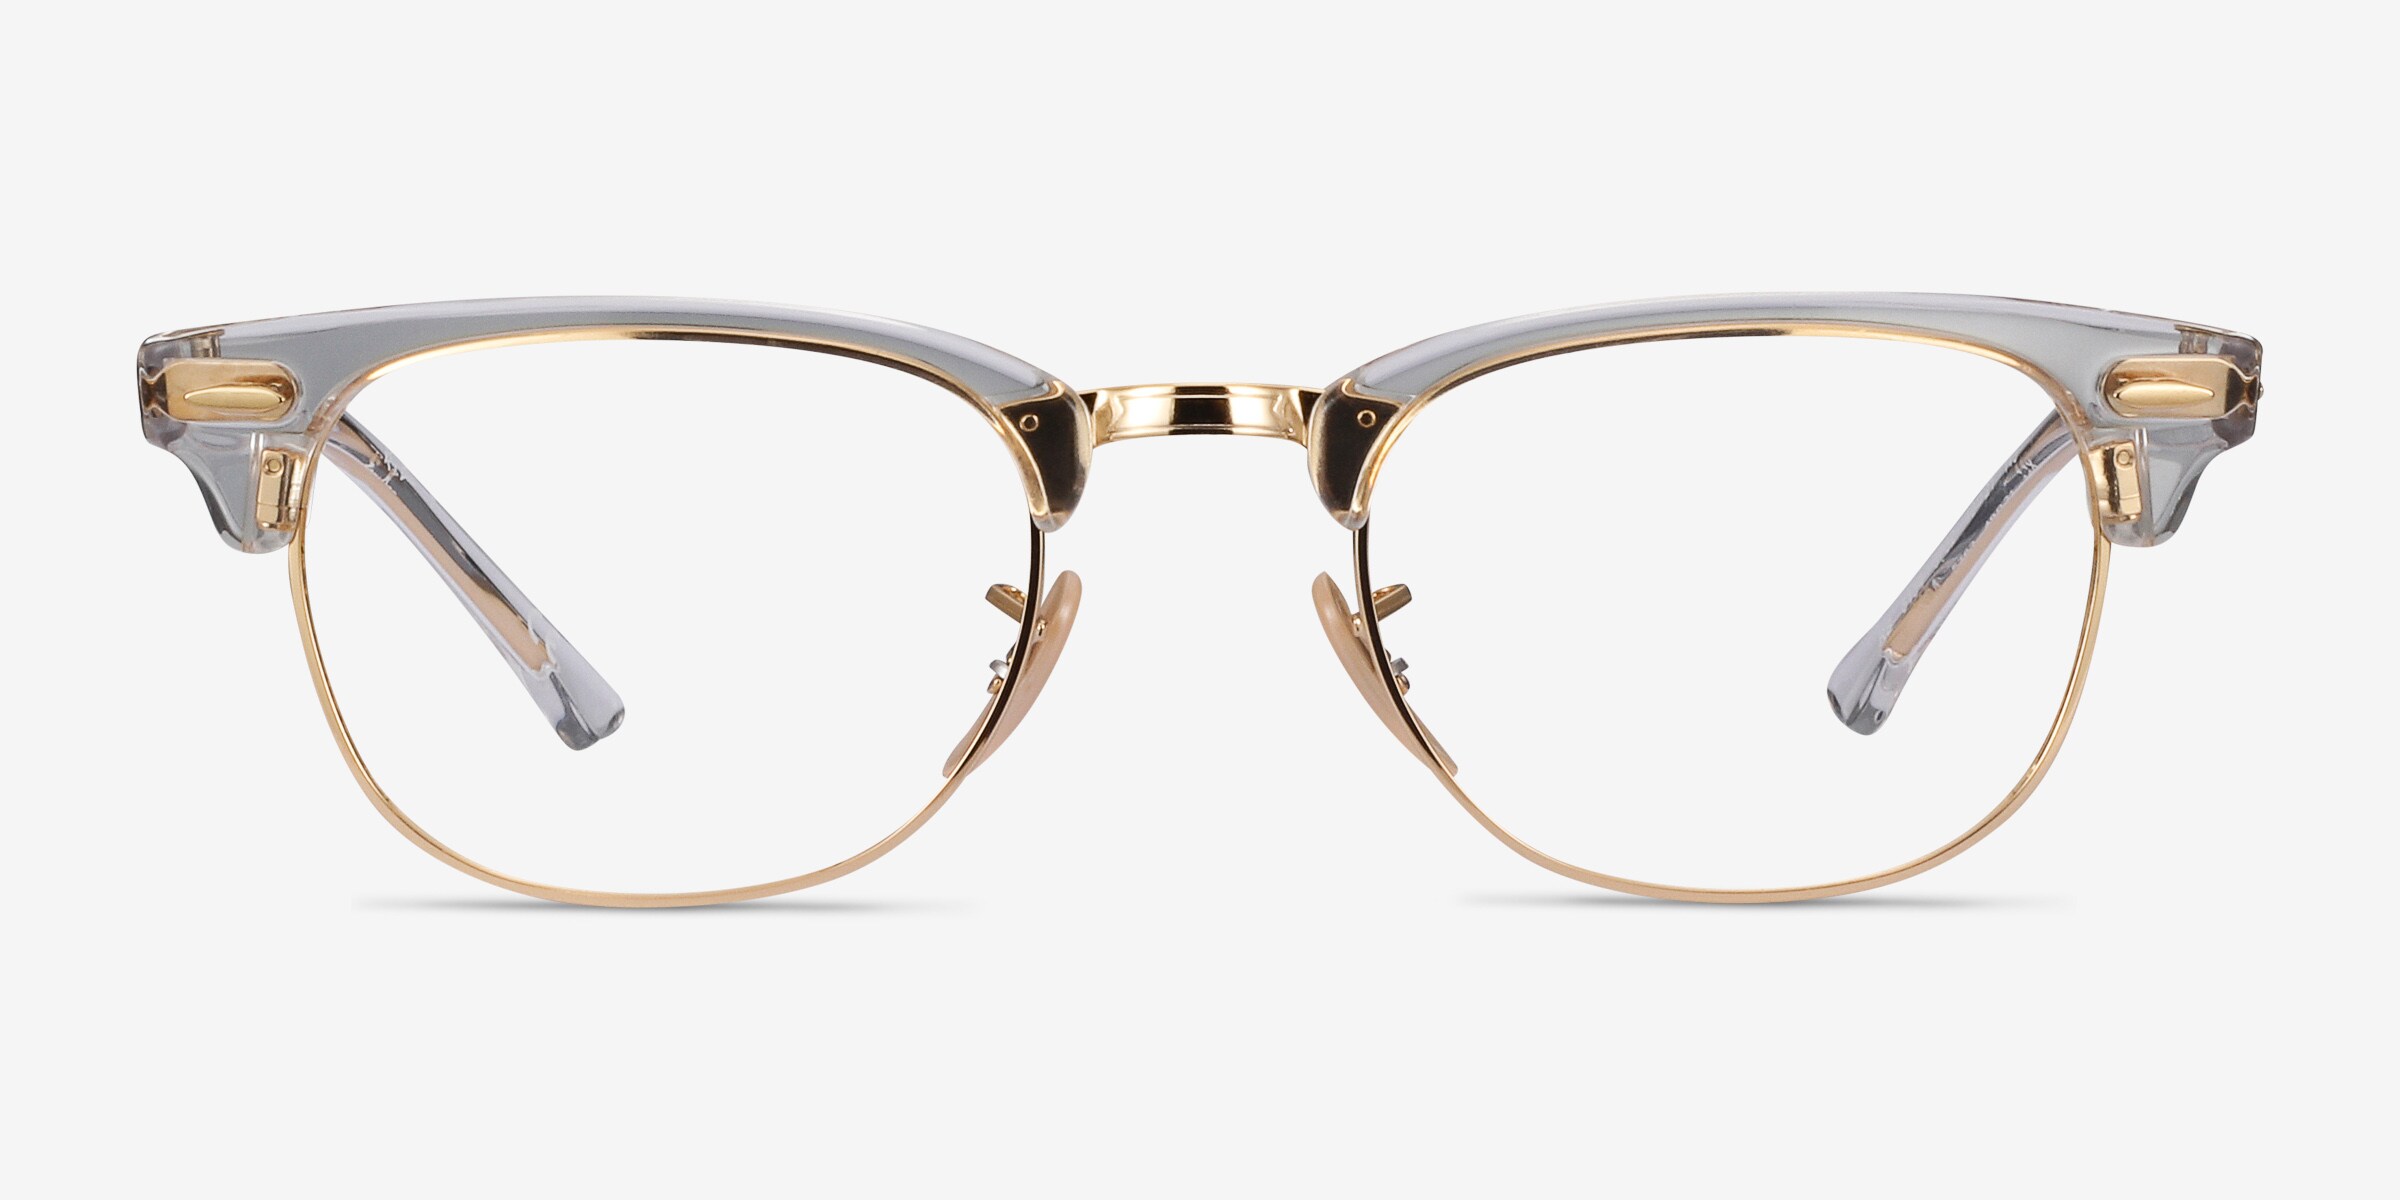 Ray-Ban RB5154 Clubmaster - Browline Gold Transparent Frame